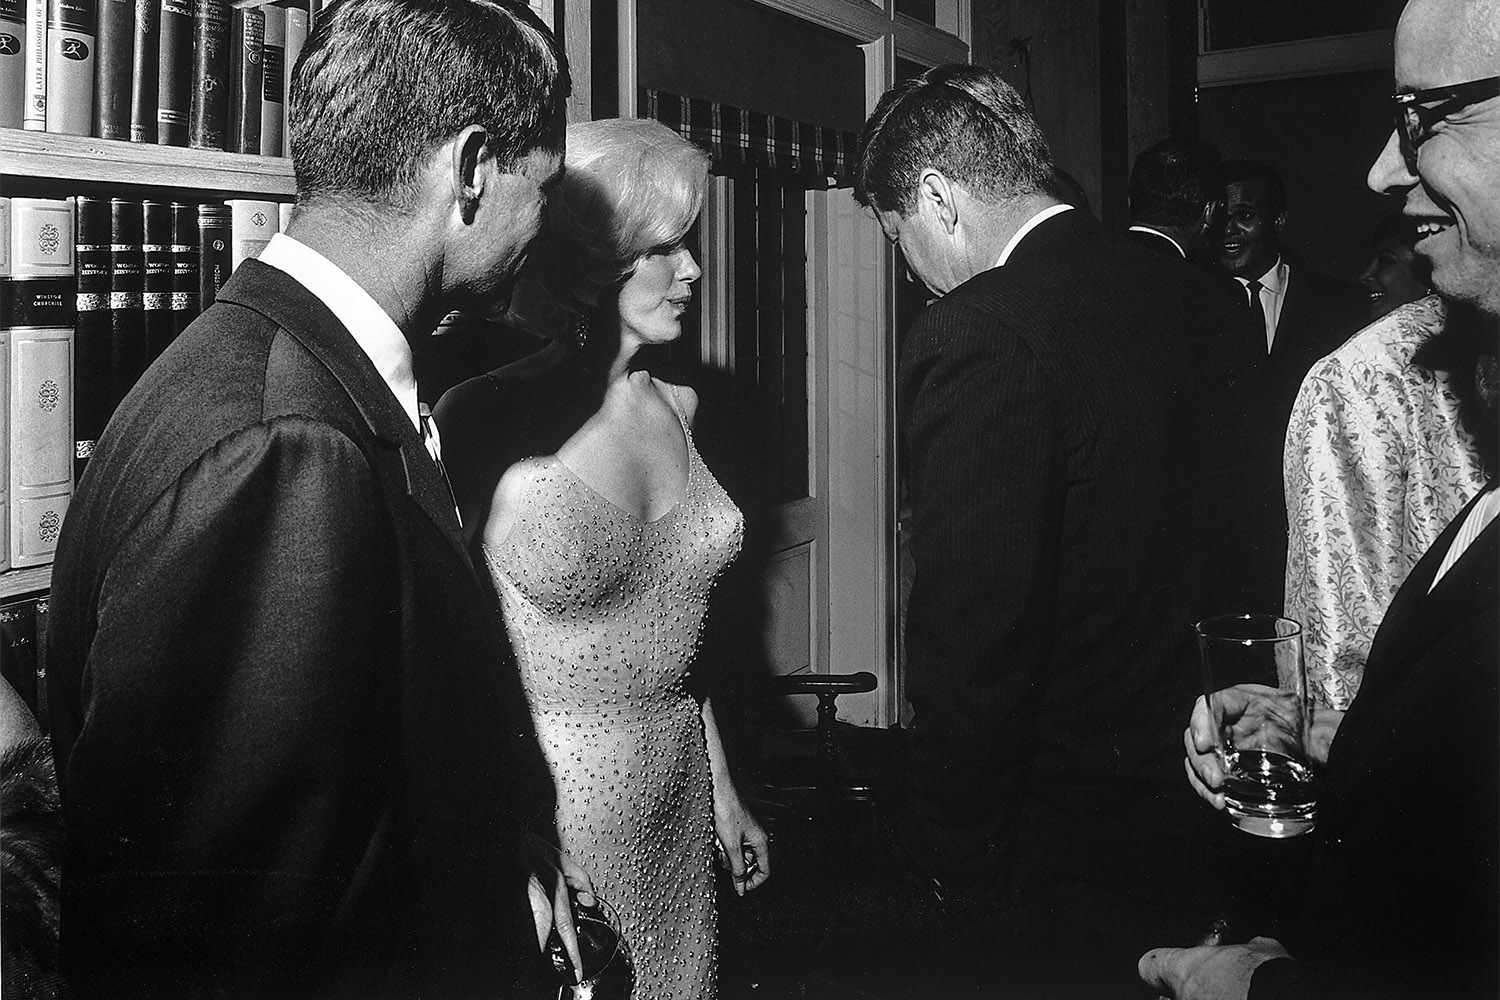 During a party at the home of movie executive Arthur Krim, American actress Marilyn Monroe stands between Robert Kennedy (left) and John F. Kennedy, New York, New York, May 19, 1962. The party followed a democratic fundraiser at Madison Square Garden honoring John F. Kennedy's birthday where Monroe famously sang "Happy Birthday.' (Photo by Cecil Stoughton/The LIFE Images Collection via Getty Images/Getty Images)